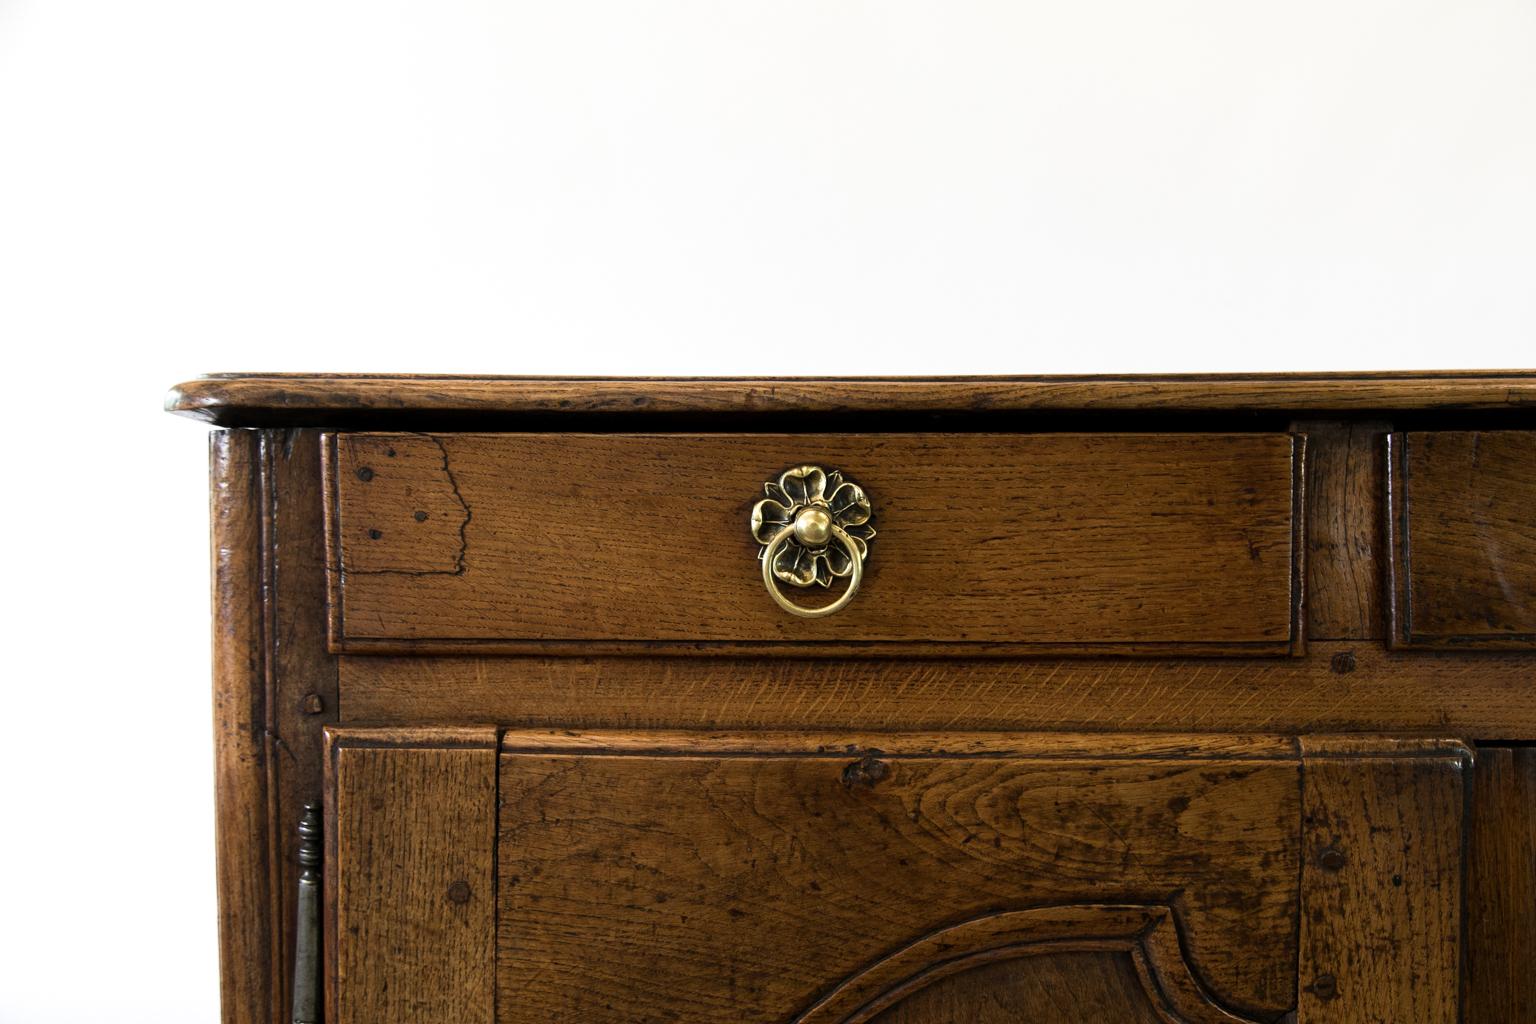 French oak buffet has the original working brass pulls and working lock and key. The top and doors have bullnose shaped molding. The center panels of the doors have a left and right shaped panel framed by moldings. The front and sides have shaped